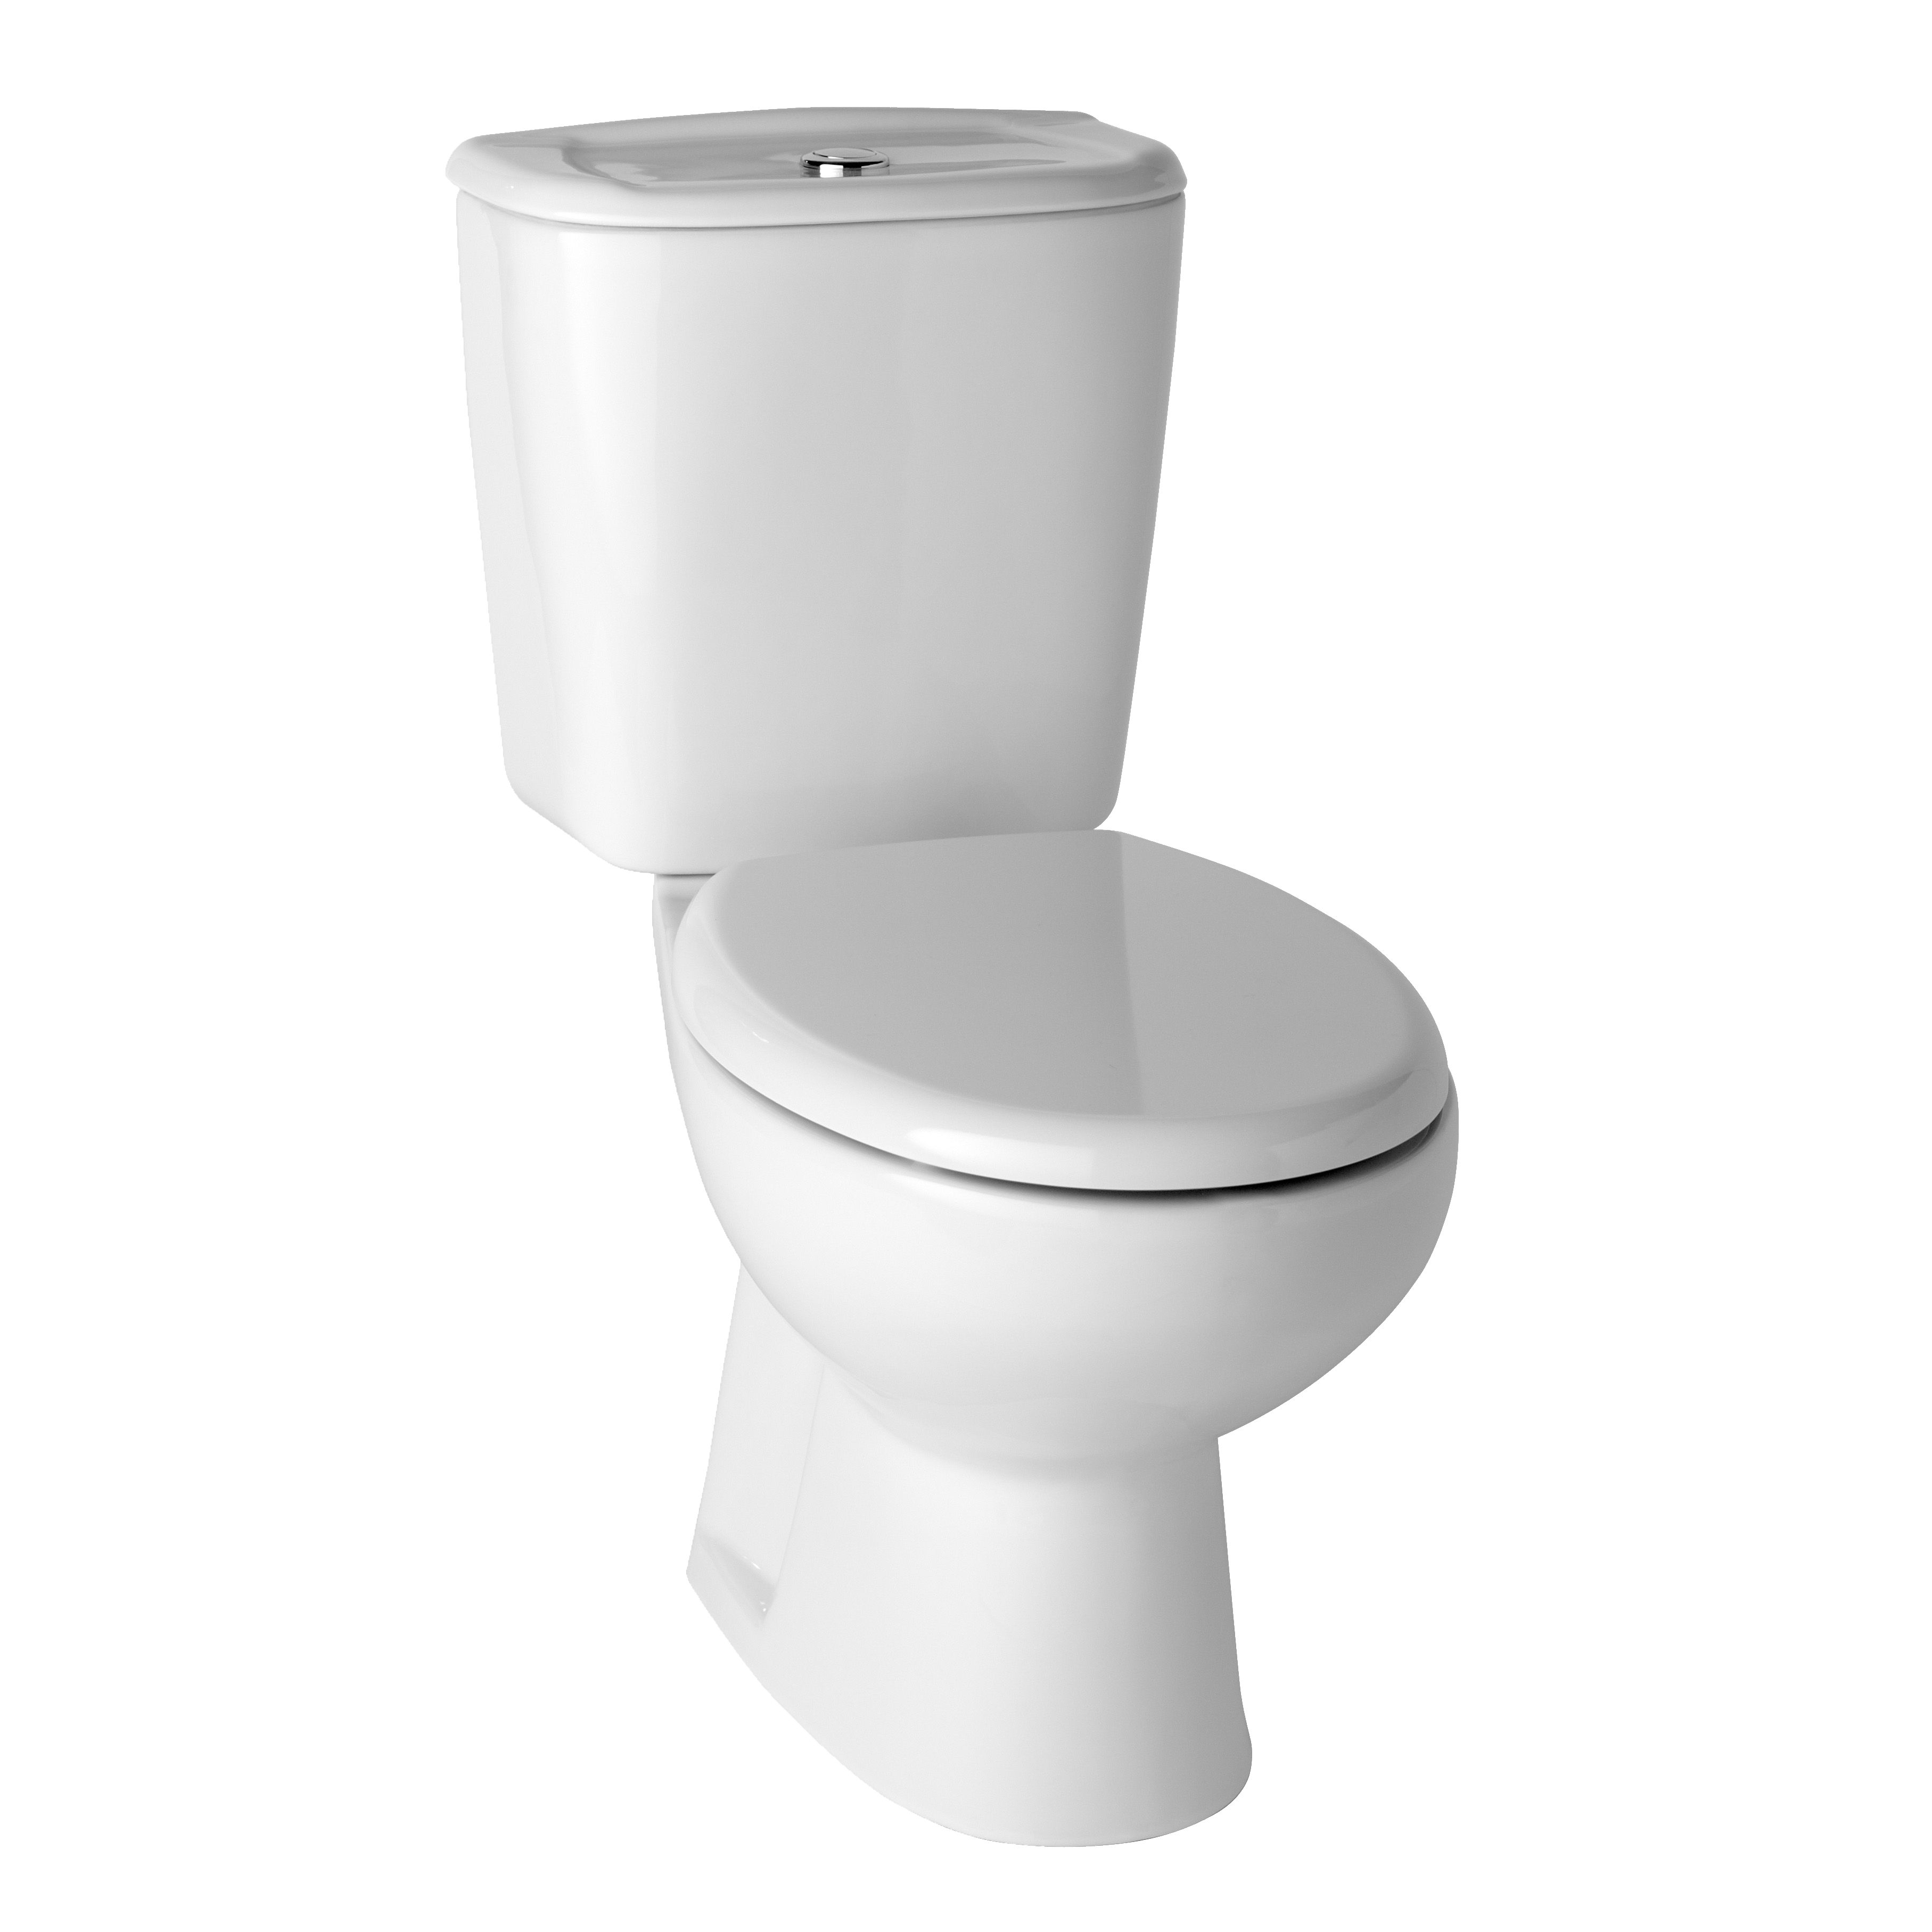 Cooke & Lewis Treviso Close-Coupled Toilet with Soft Close Seat